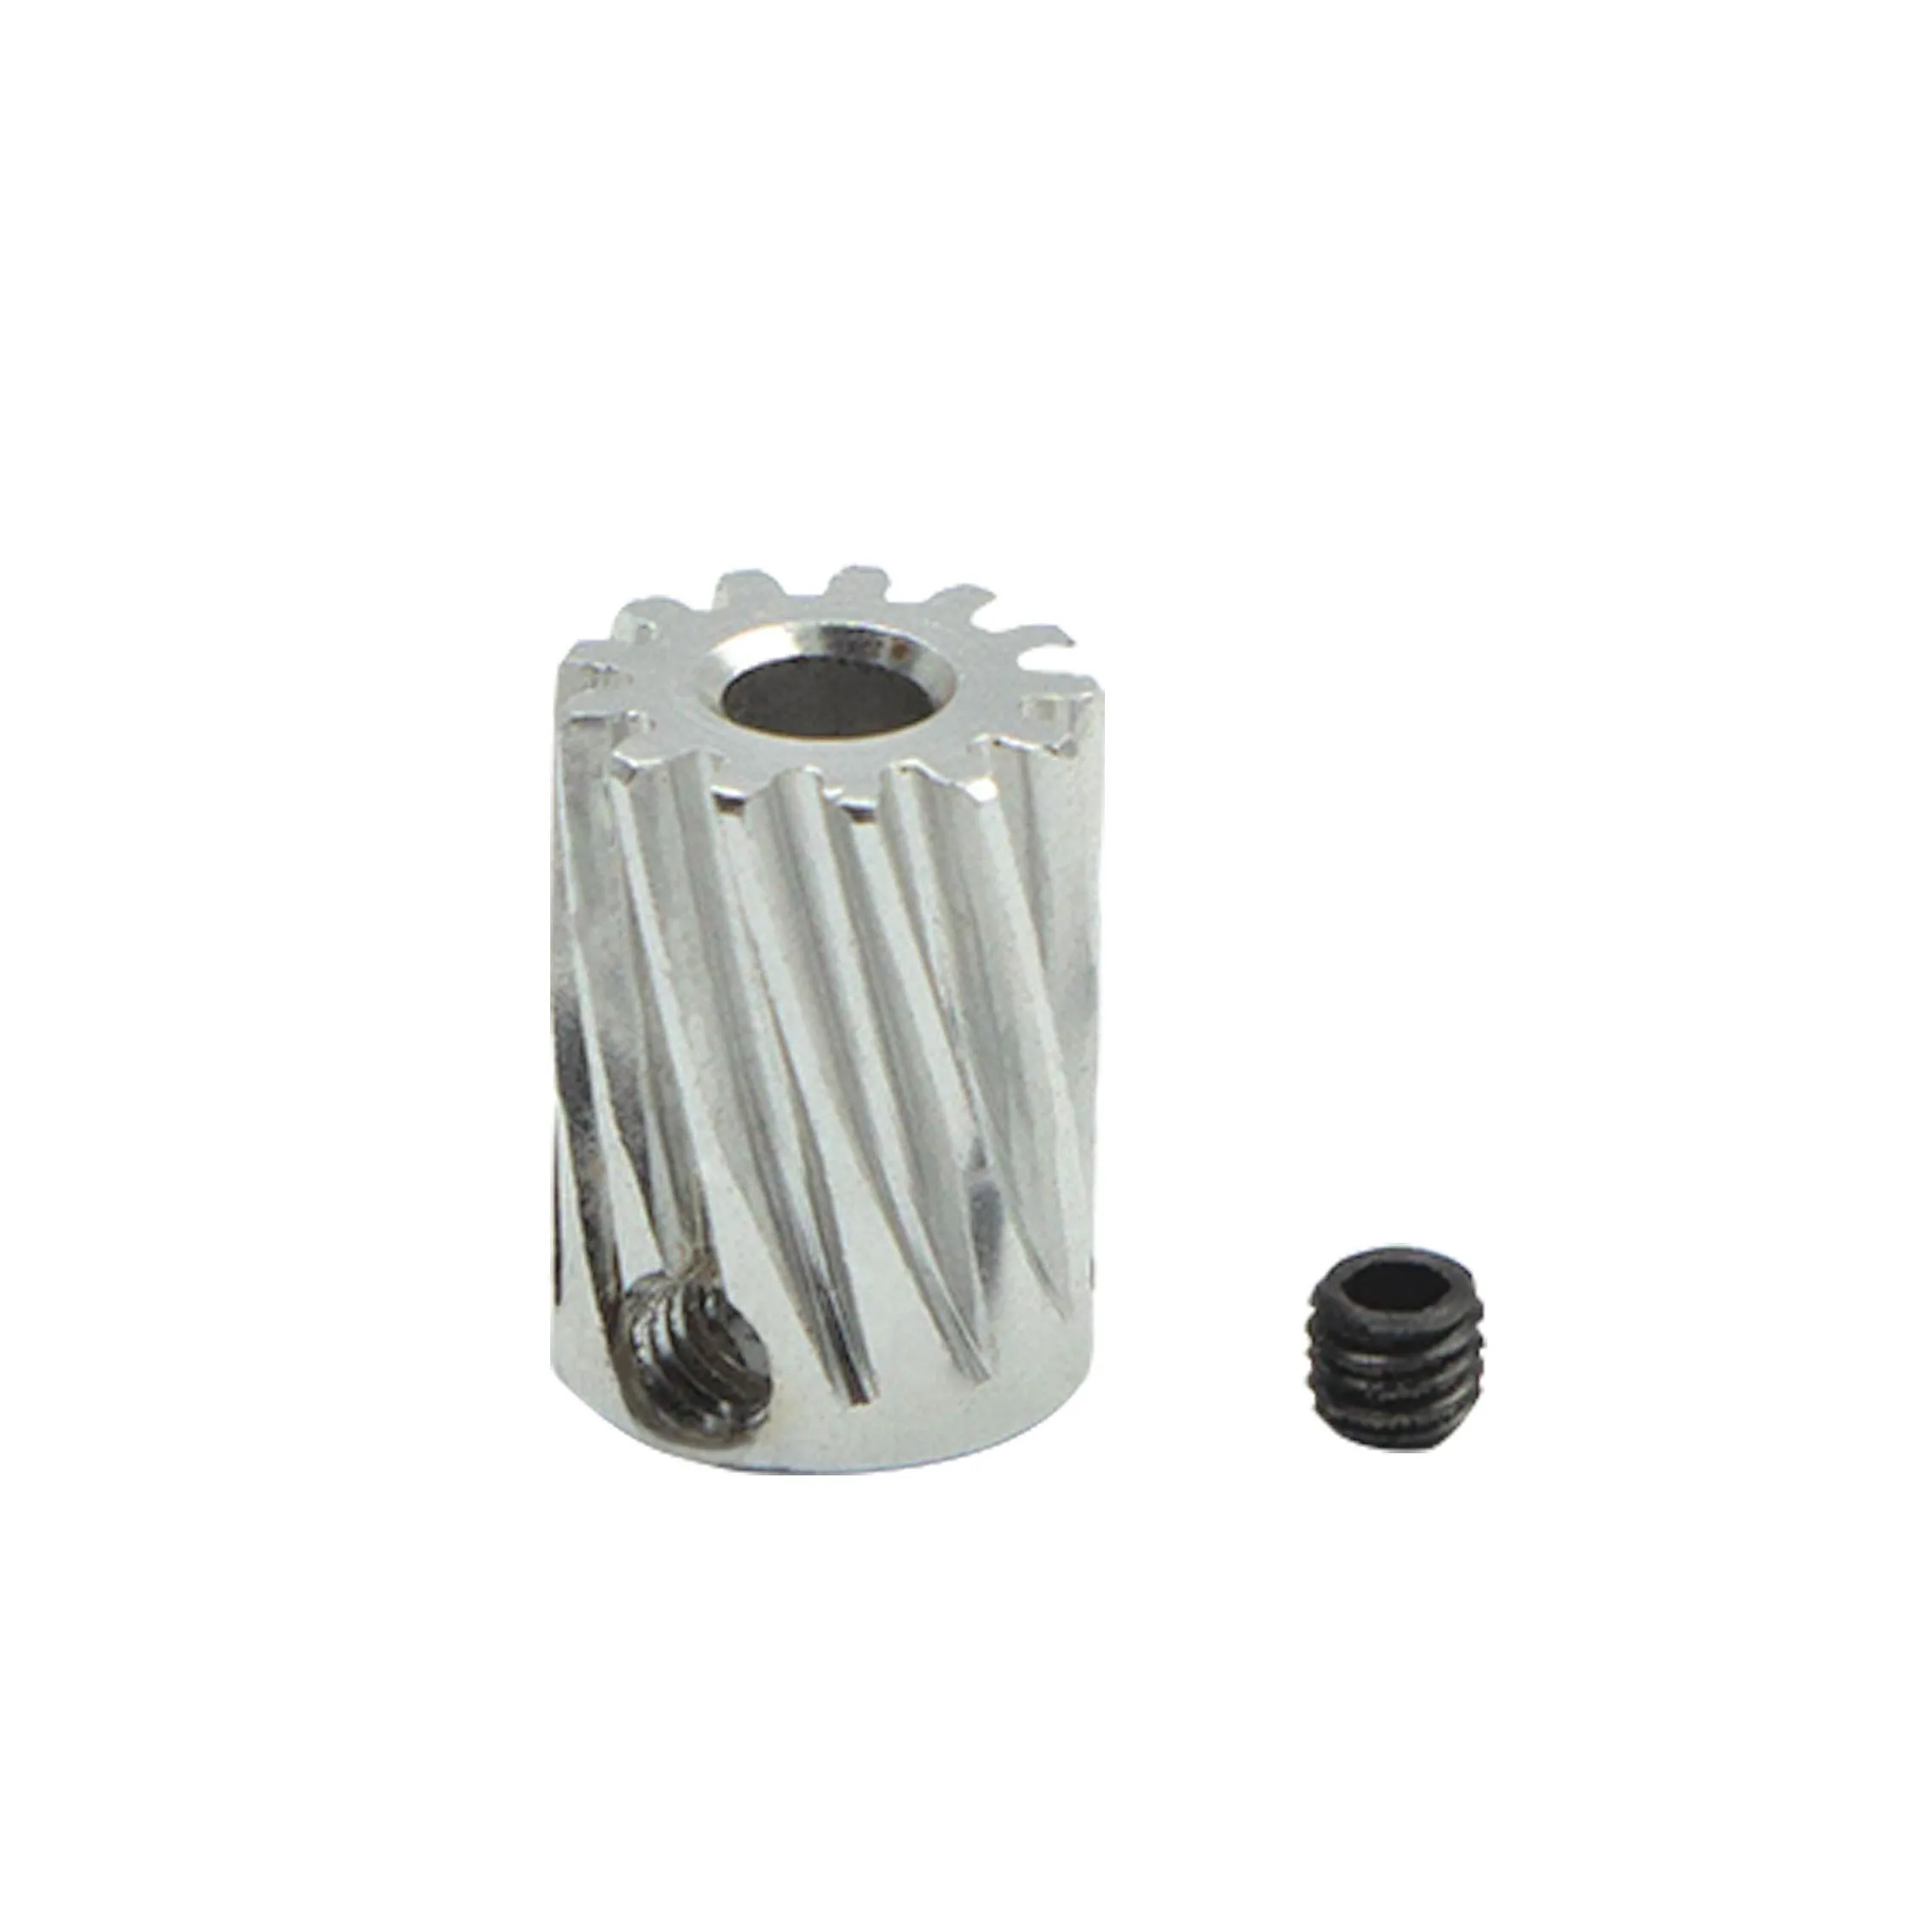 Flywing bell206 UH1 Bell-206 UH-1 RC Helicopter Motor Gear - $8.45